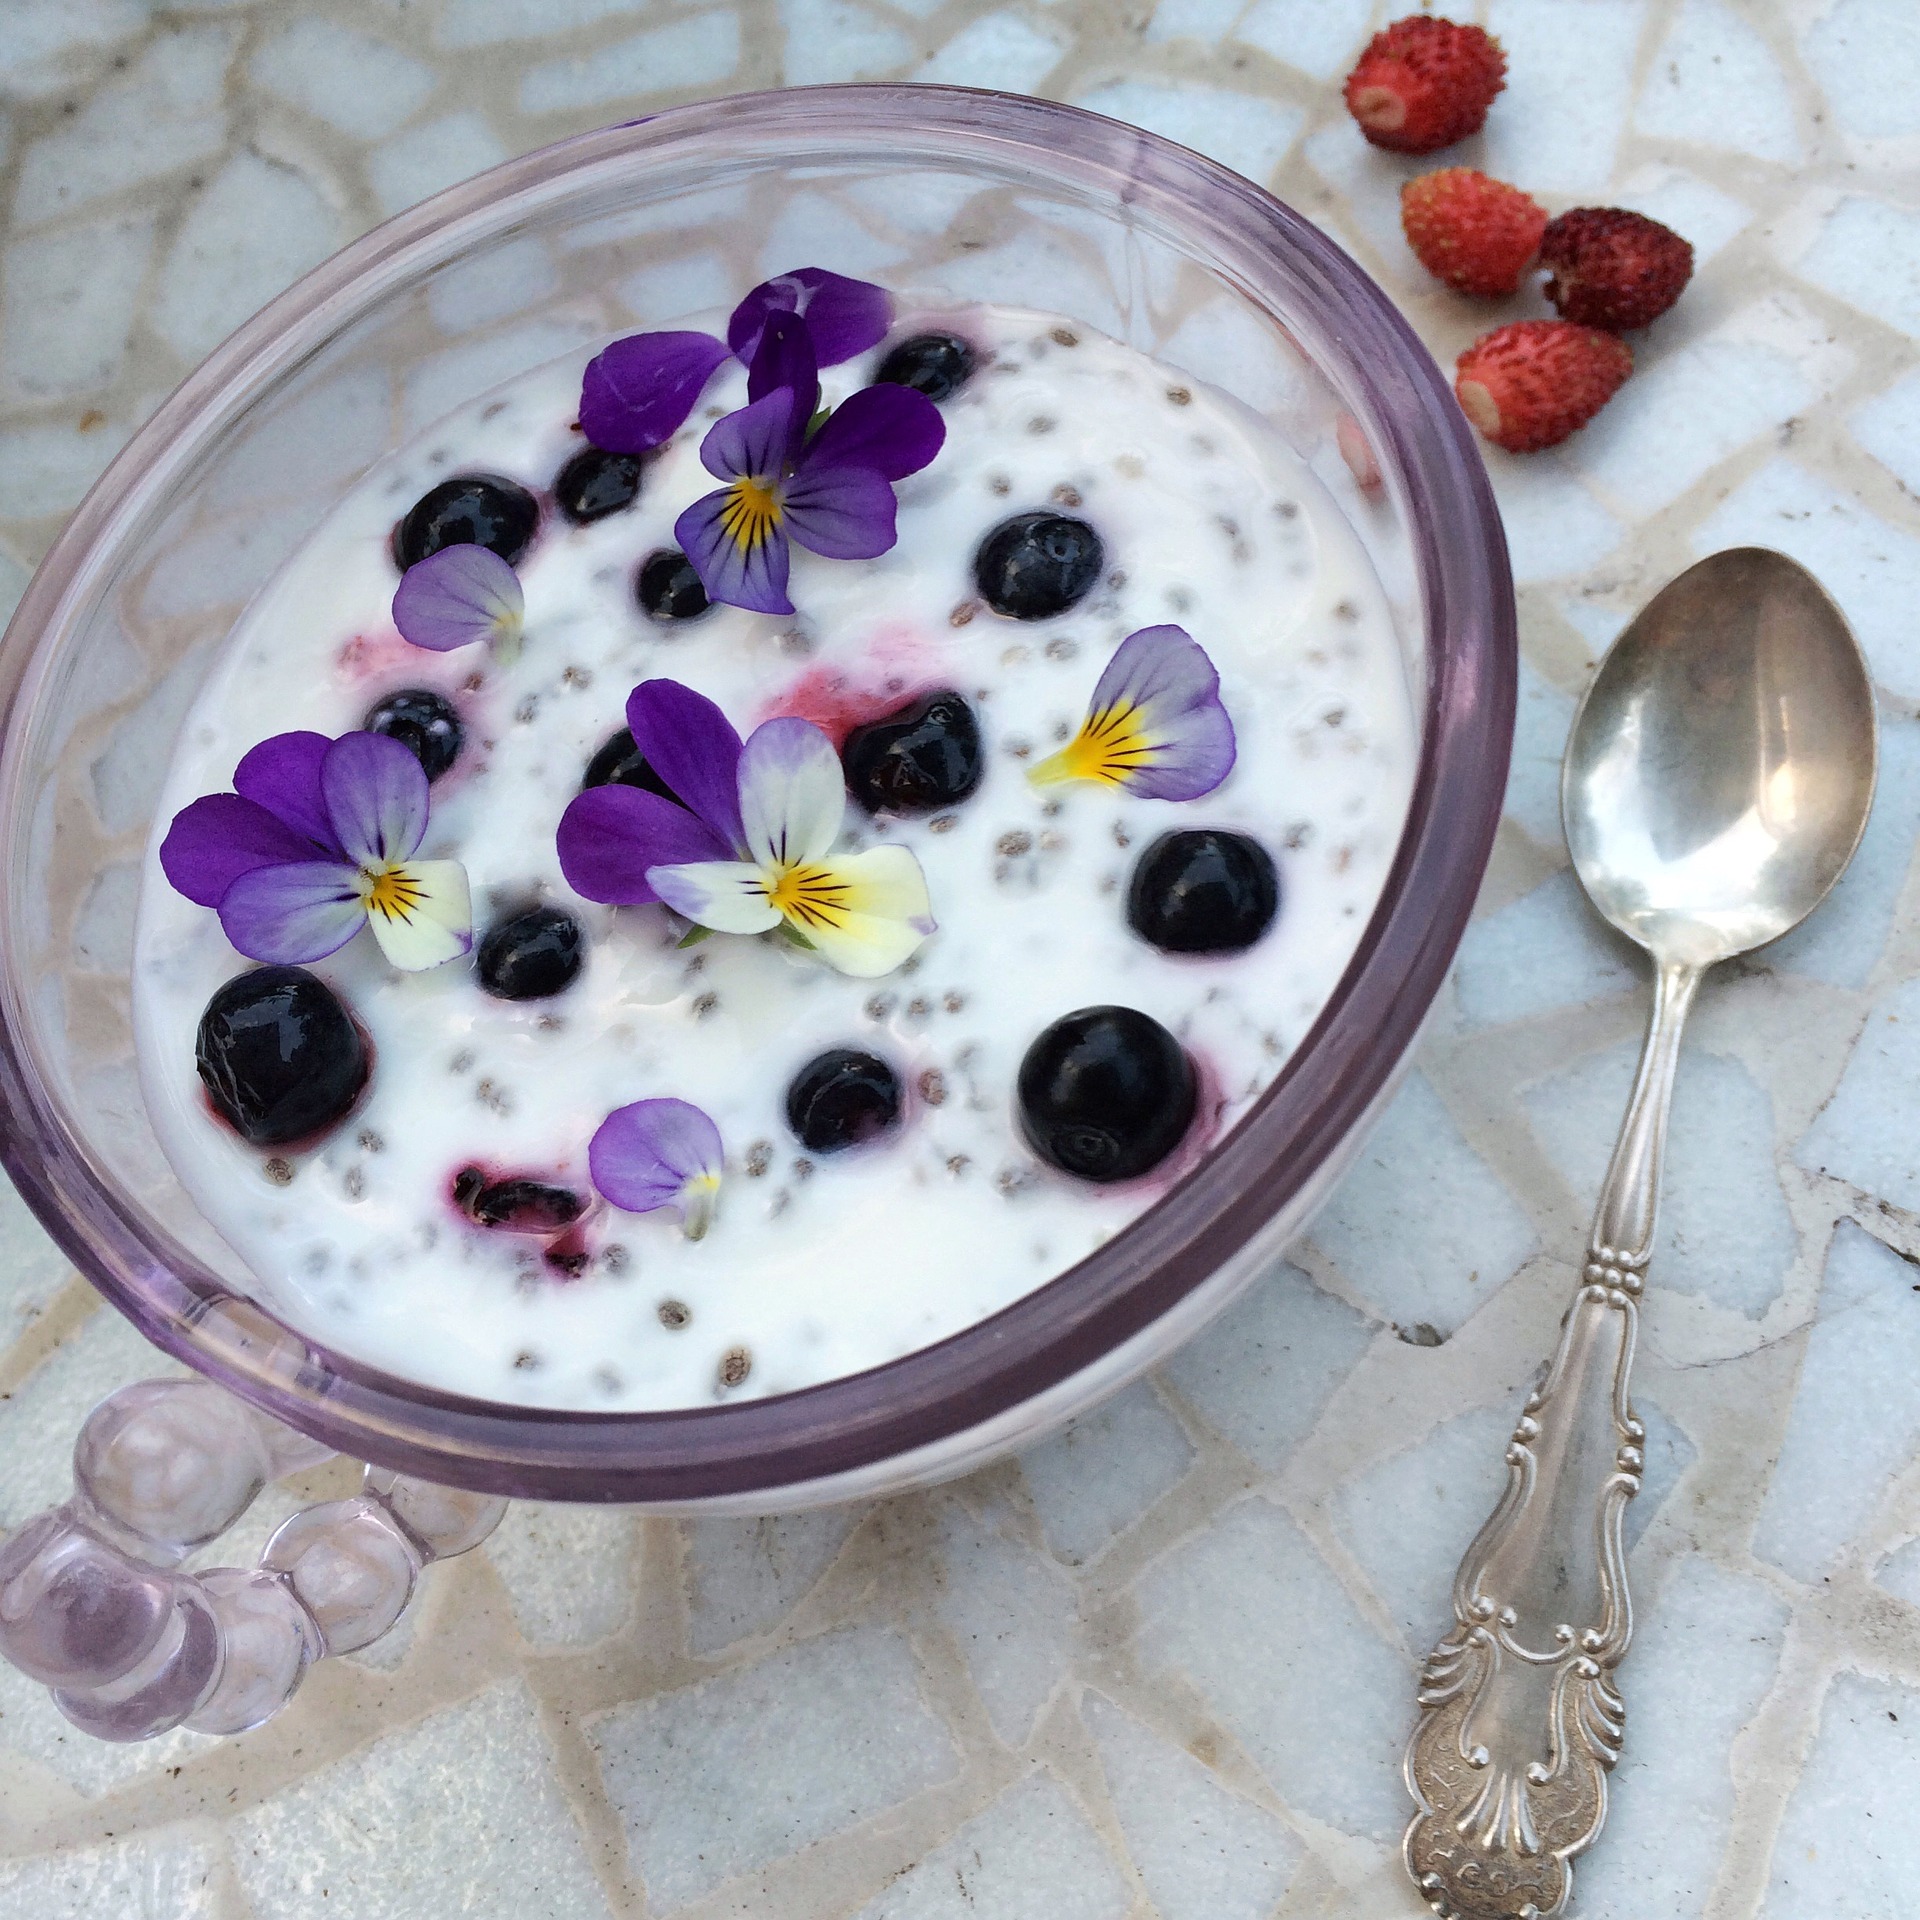 chia seed pudding bowl with berries and violets scattered on top